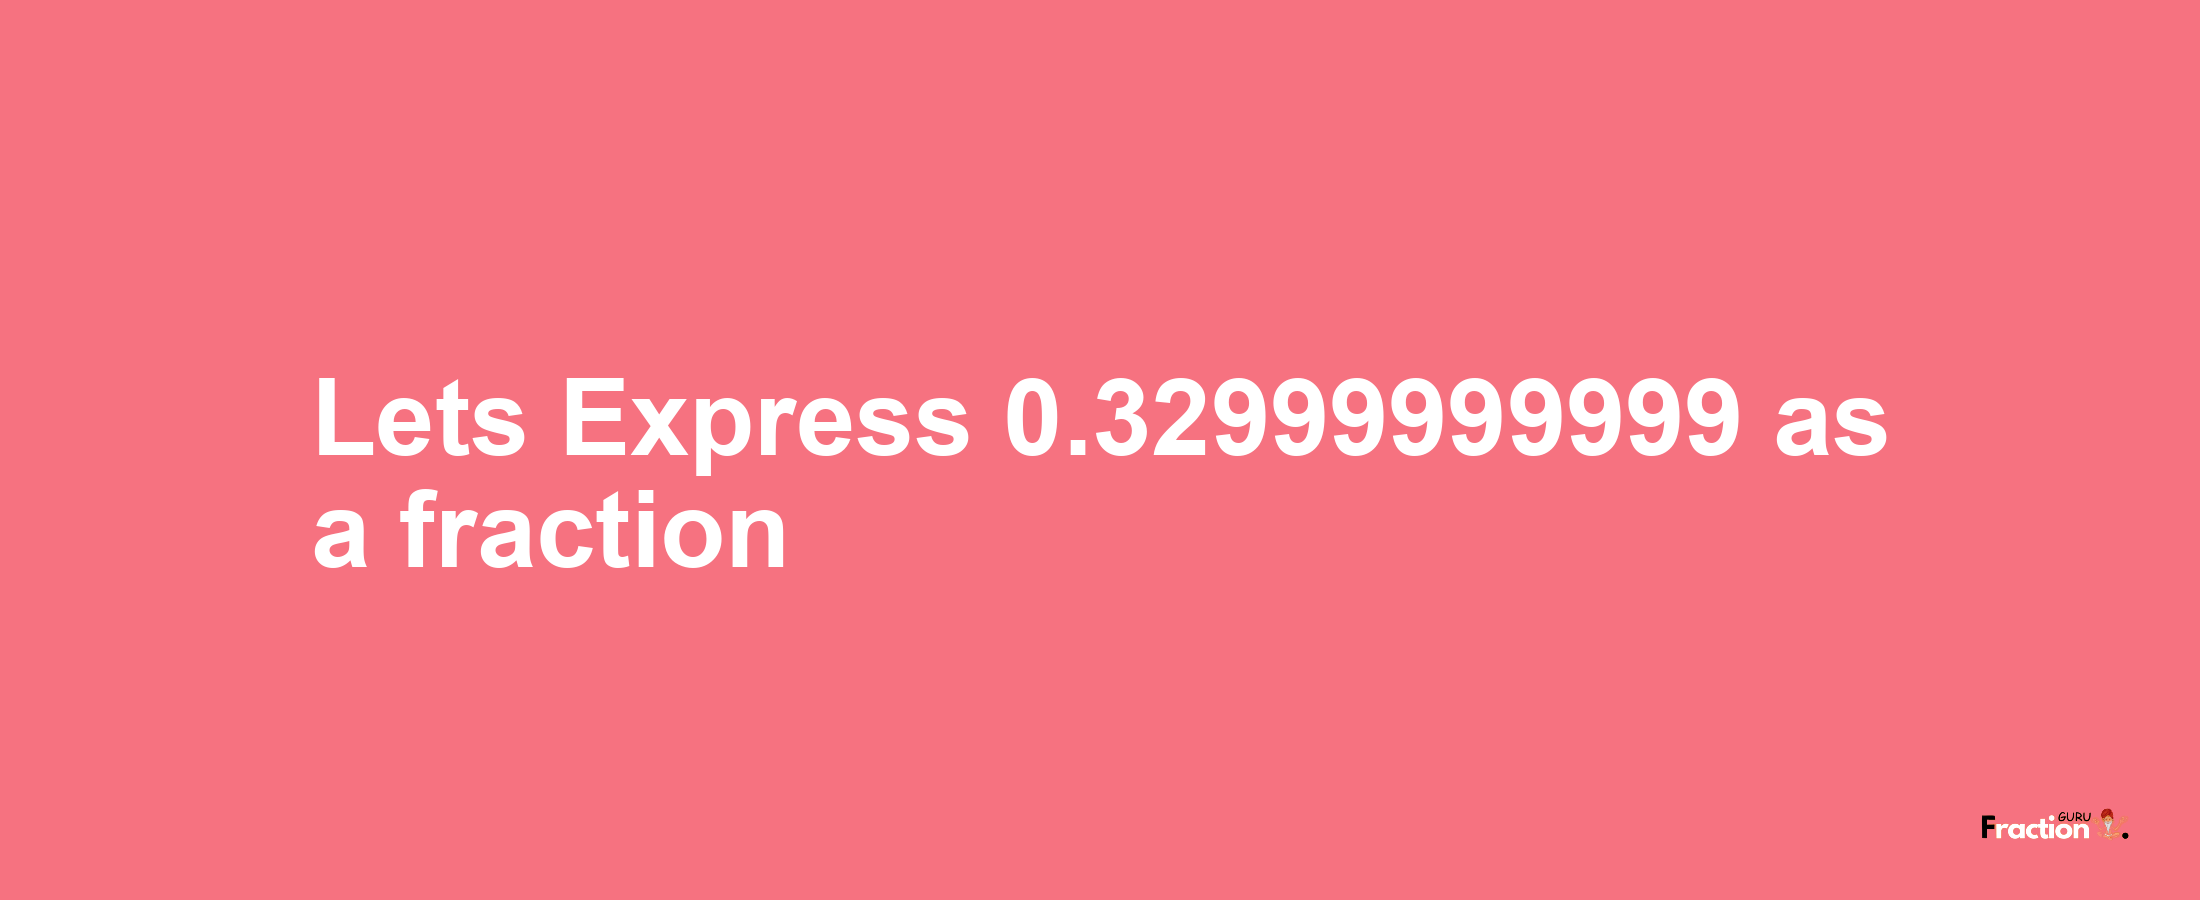 Lets Express 0.32999999999 as afraction